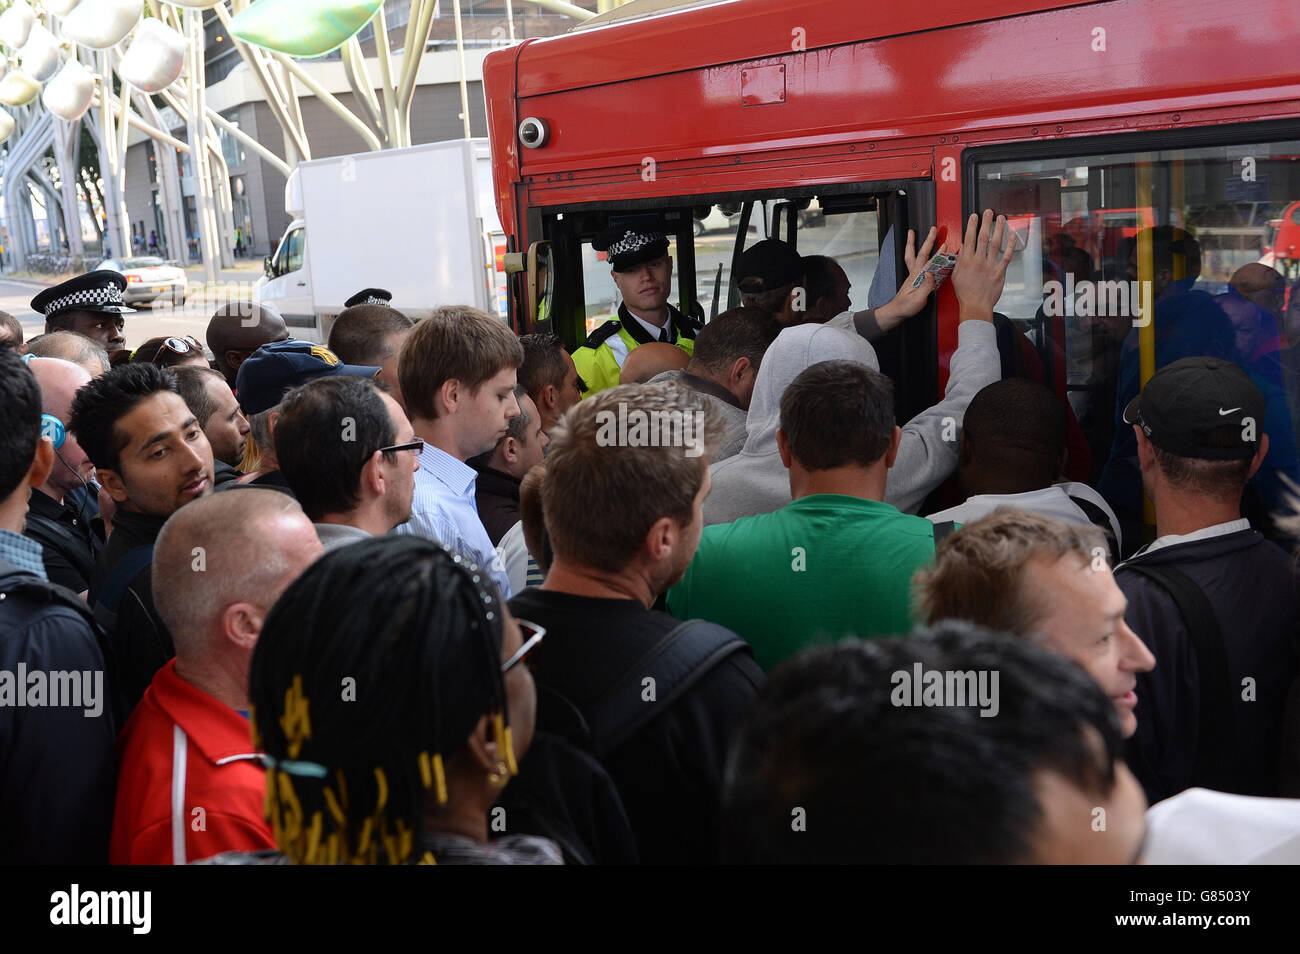 People queue for a bus at Stratford station, London, as commuters face travel misery trying to get to work because of a strike which has brought London Underground to a standstill. Stock Photo